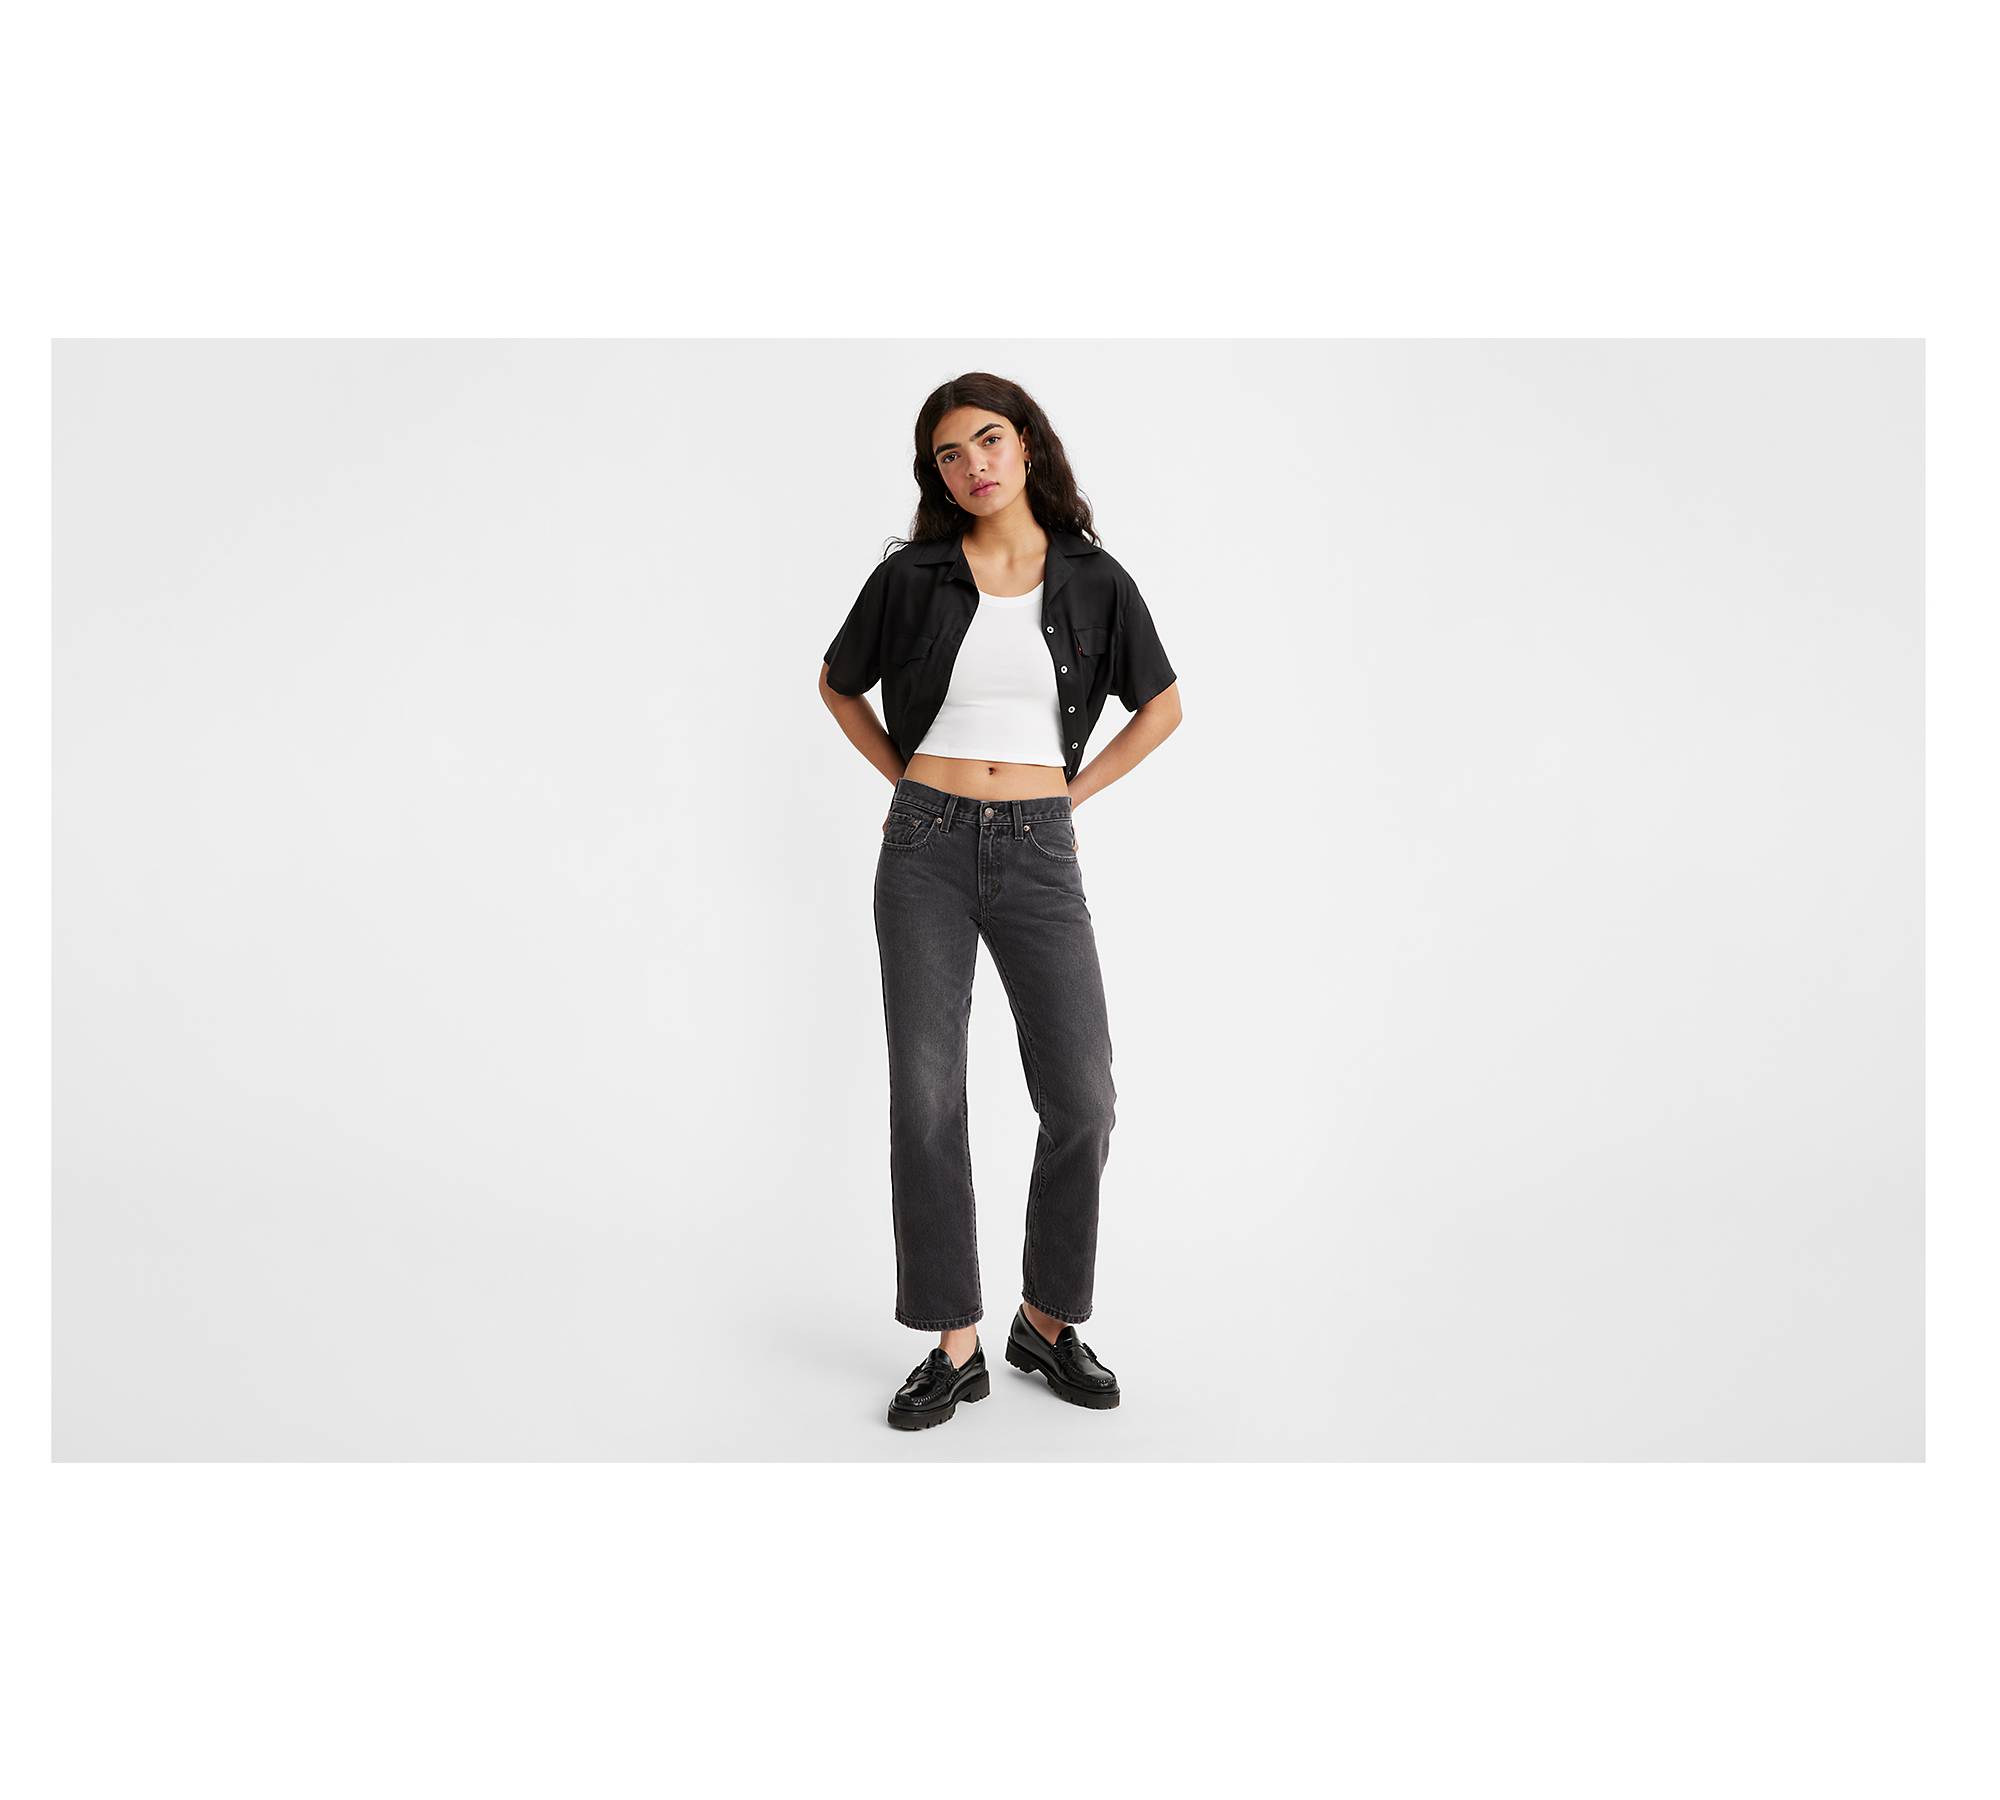 Women's Bootcut and Flare Jeans, Black/Dark grey